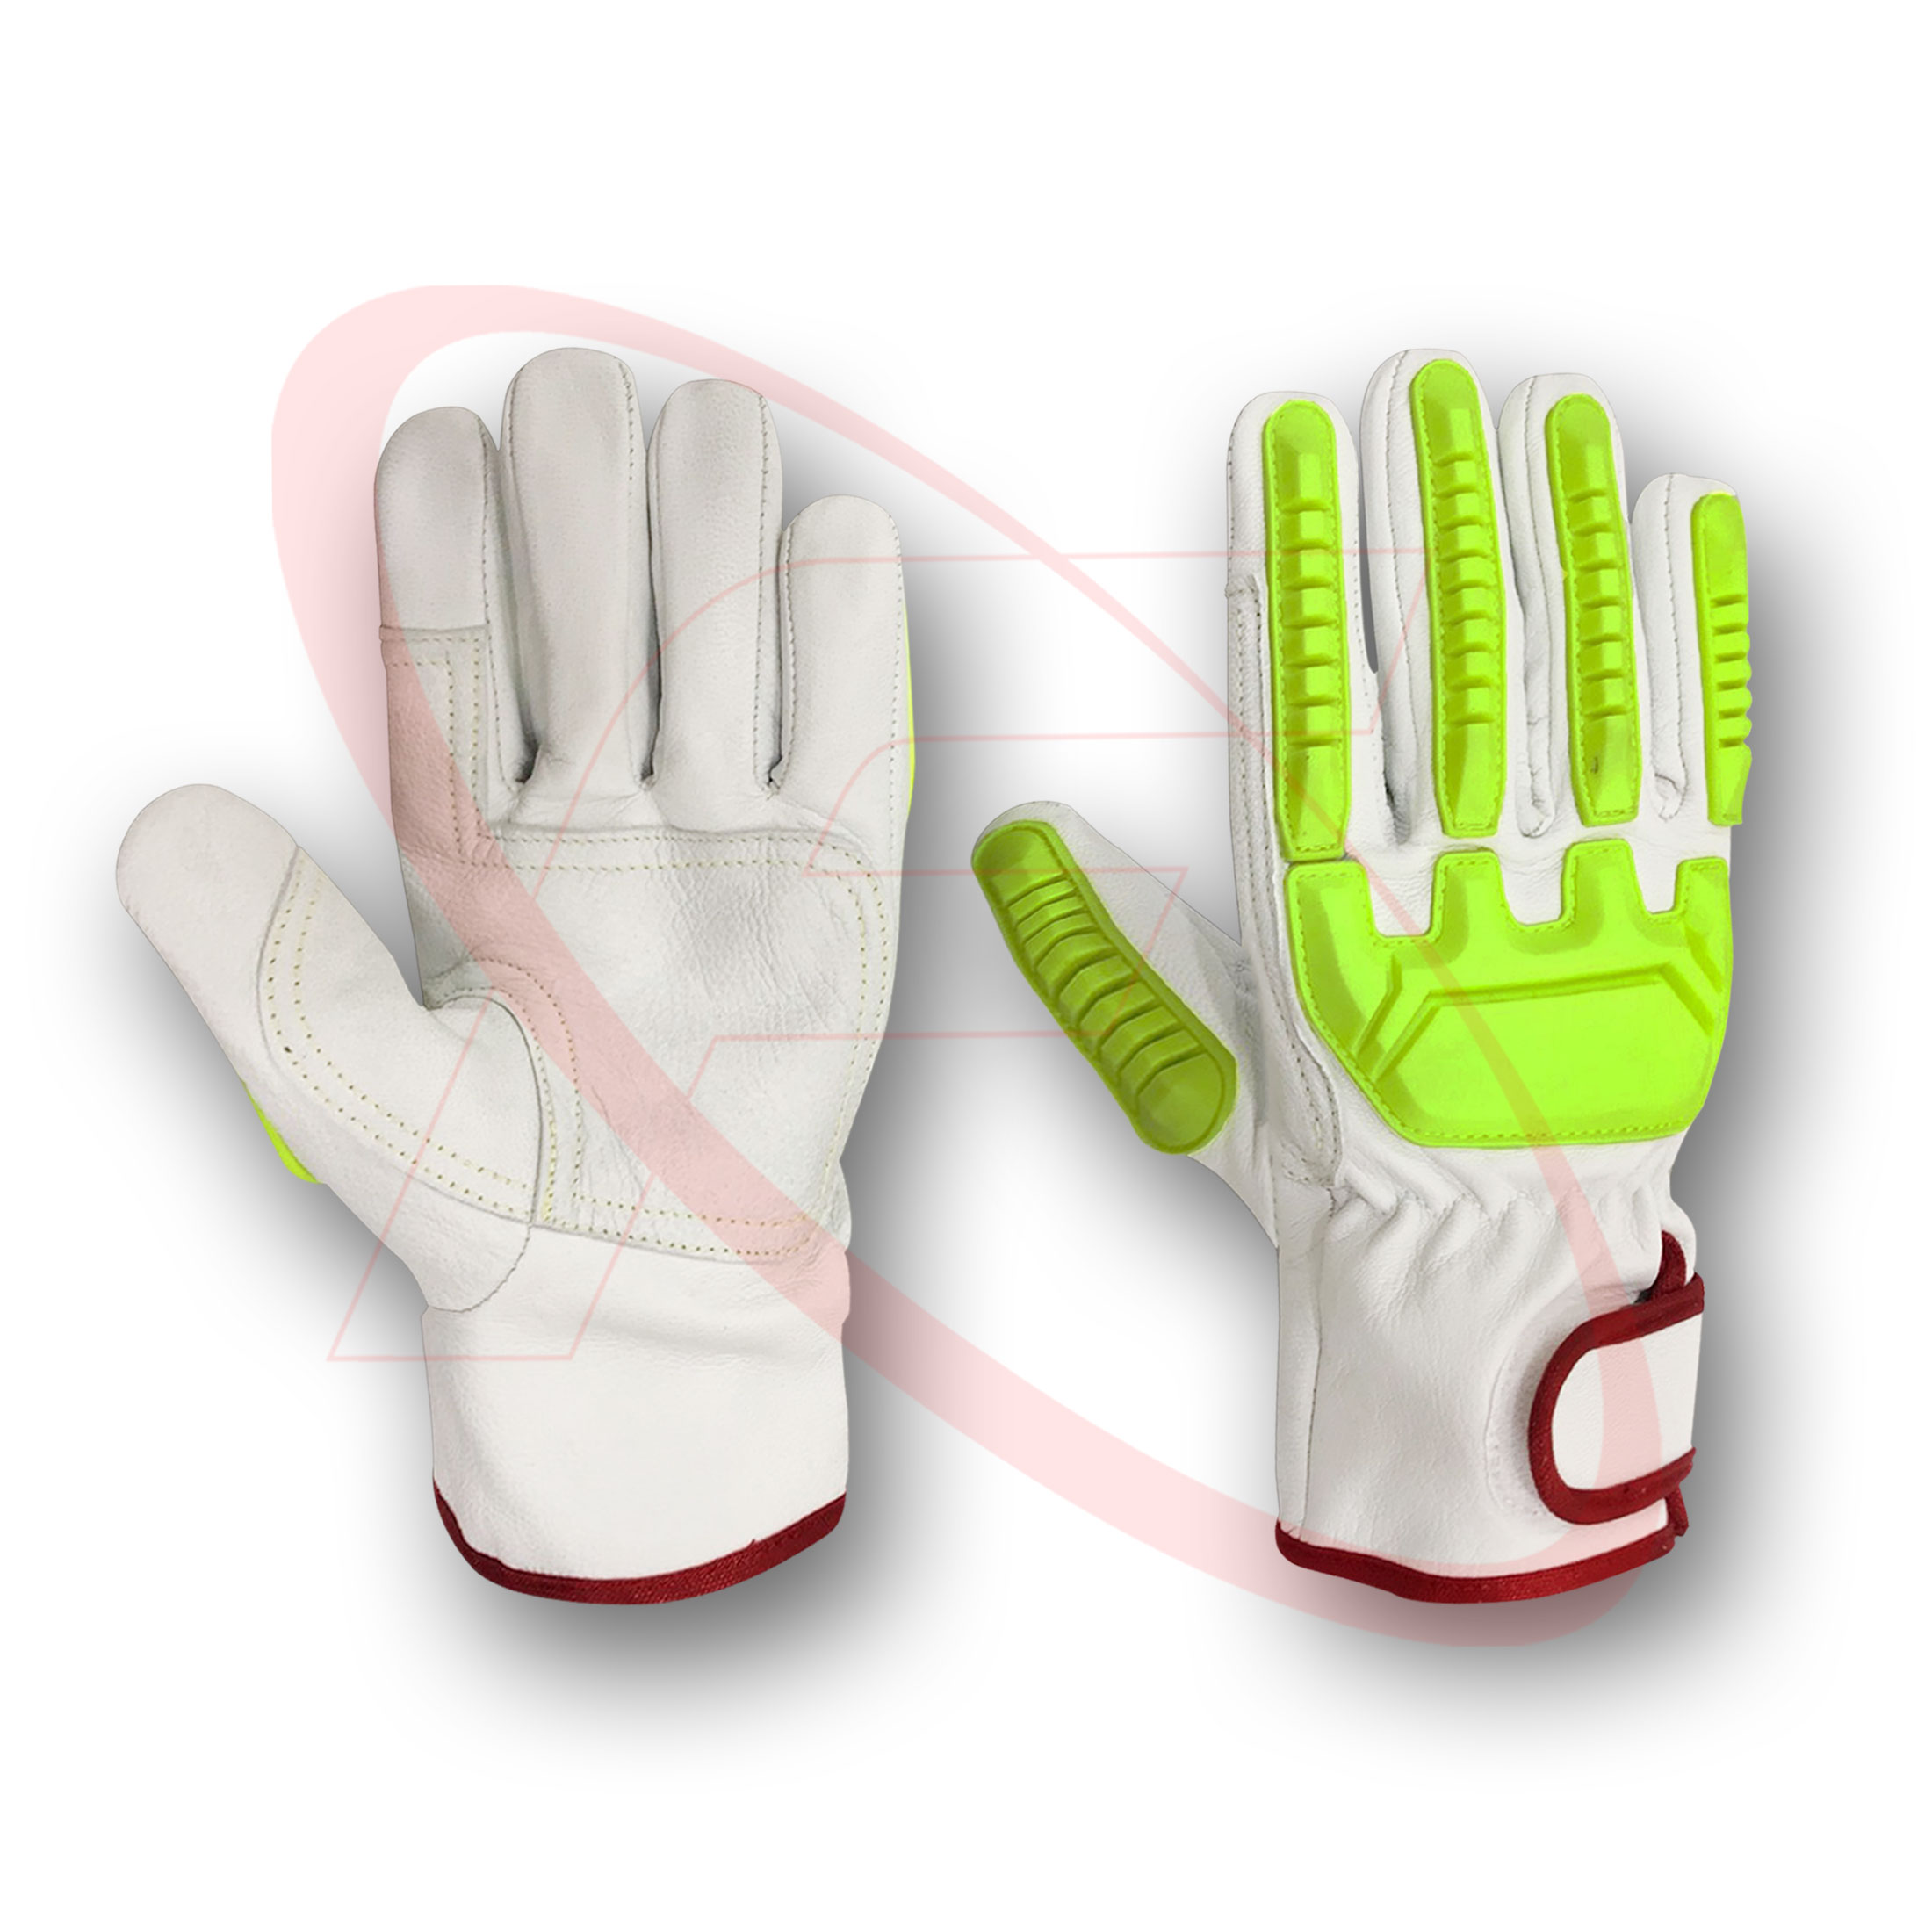 Anti Impact Safety Gloves In Goatskin Leather Driver Gloves Best Quality Impact Protective Driving Gloves Best Impact Gloves